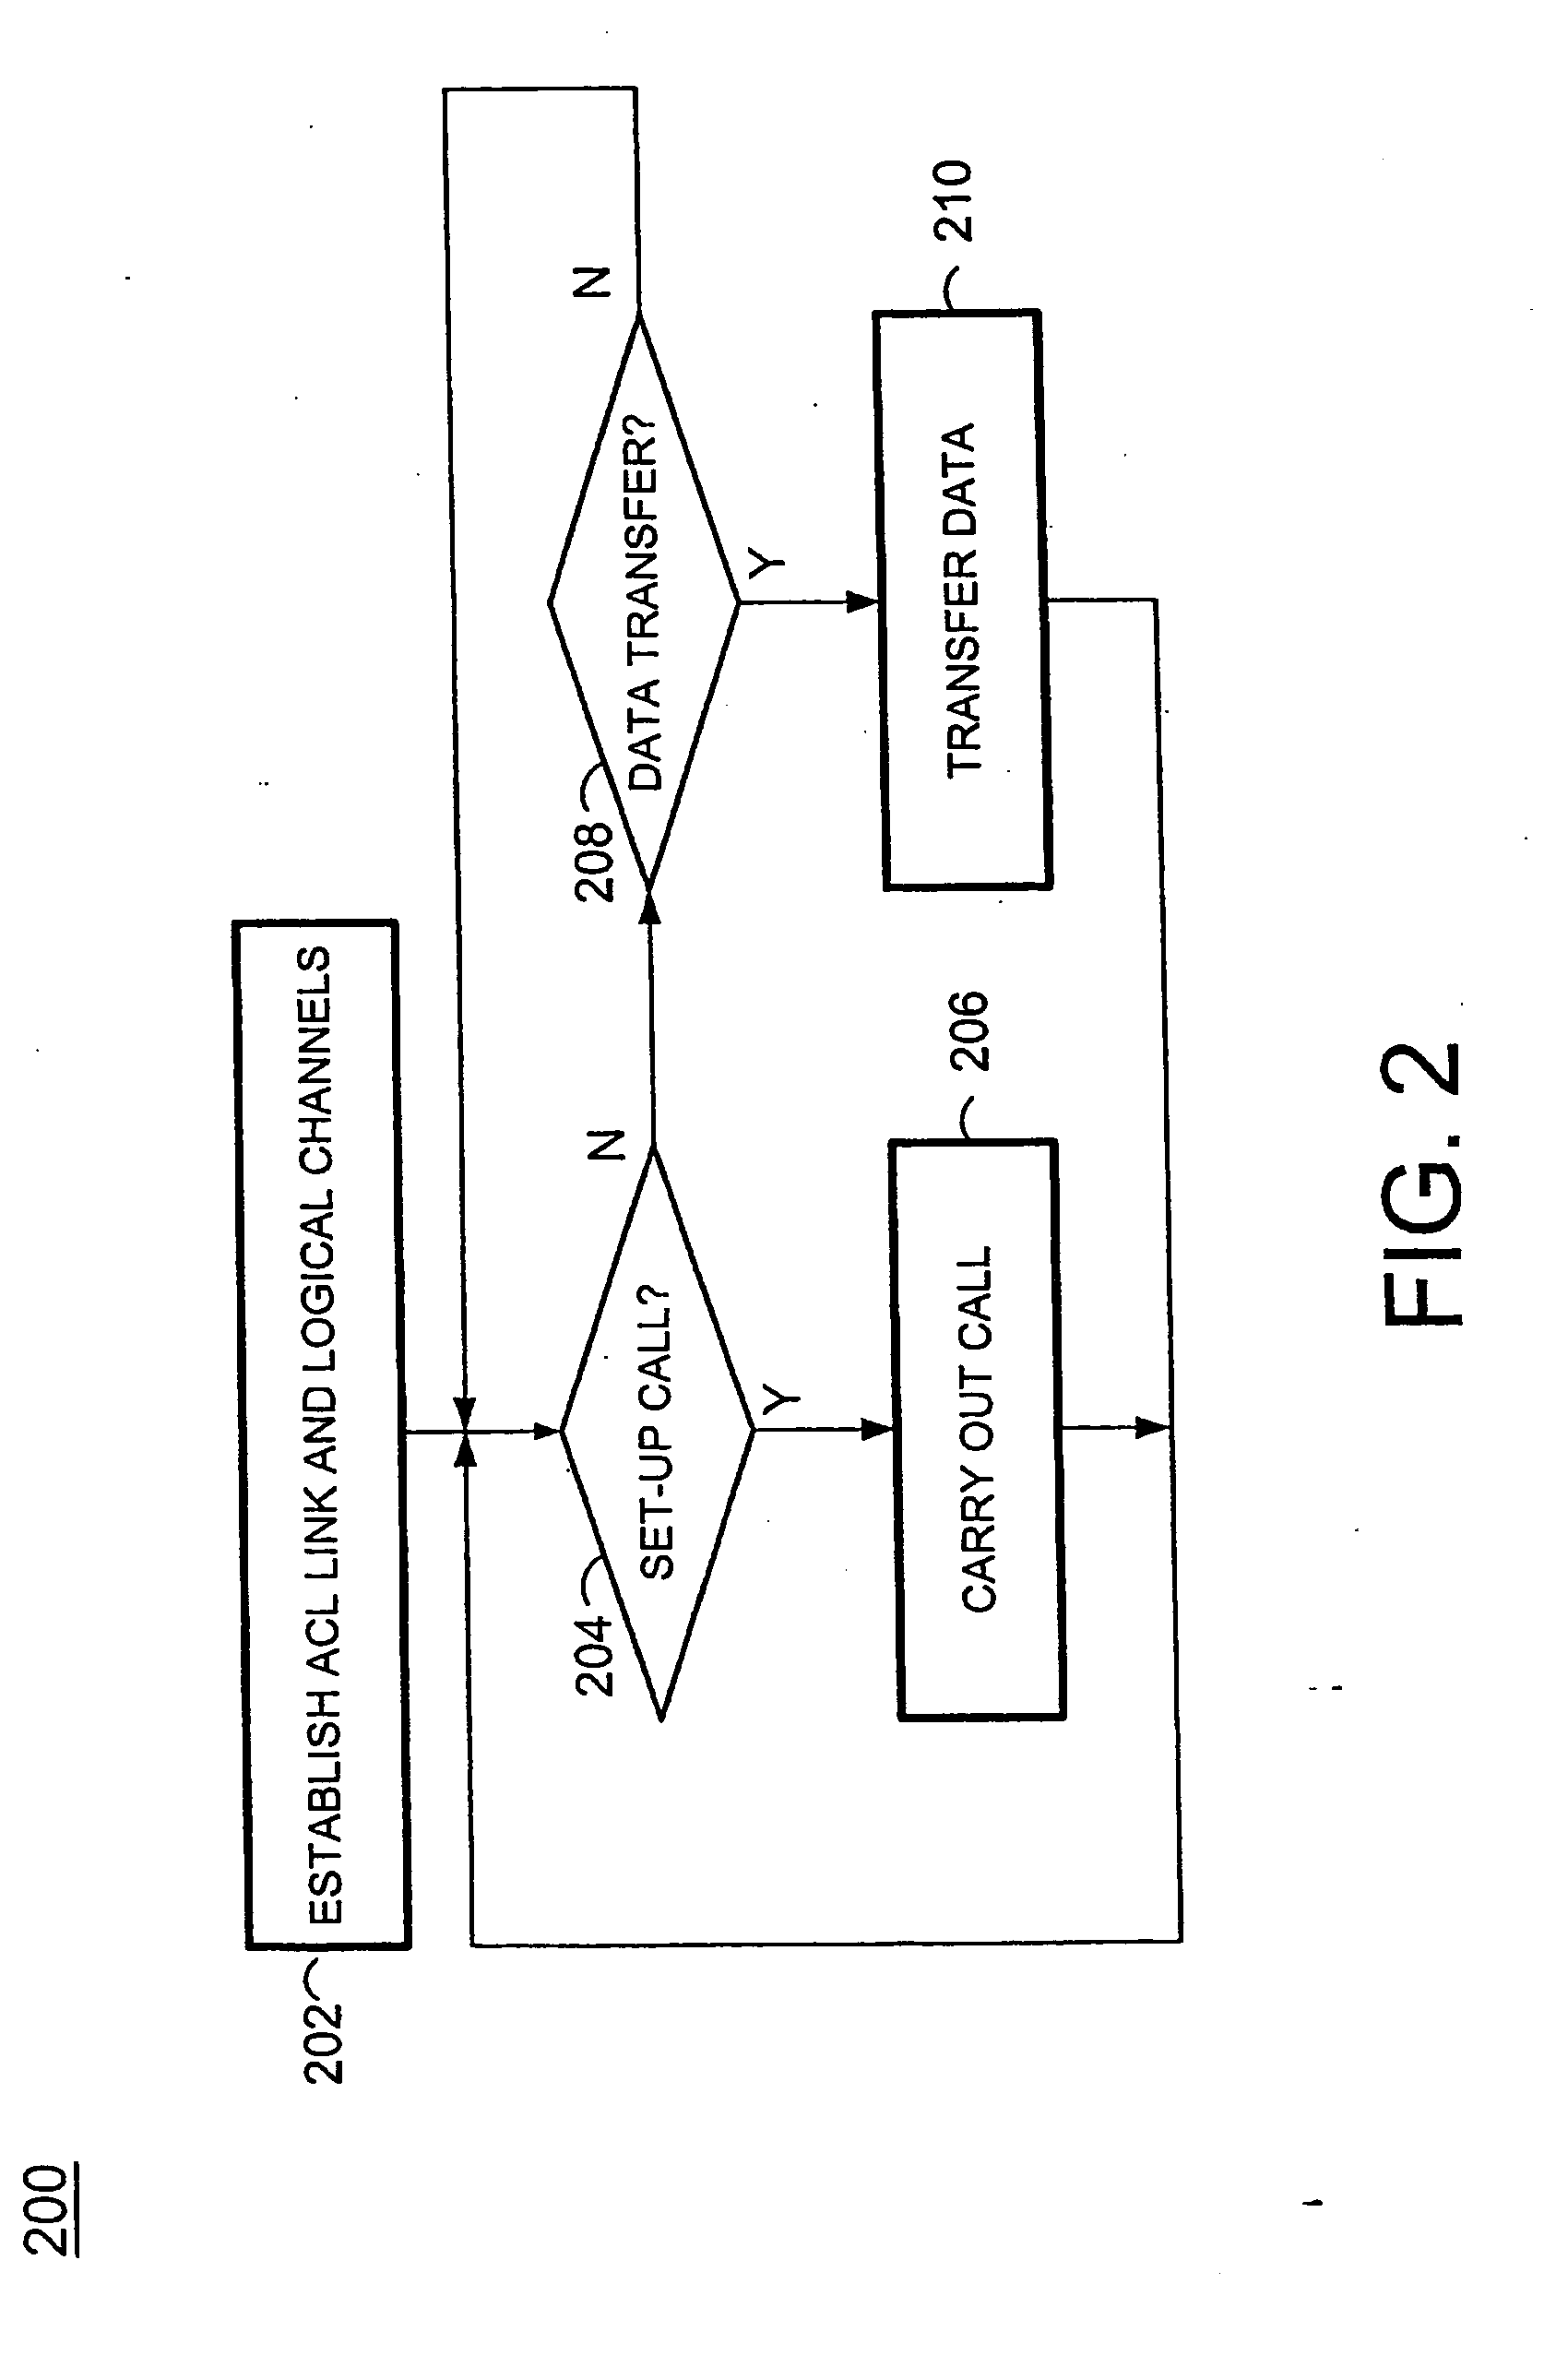 System and method for accessing a multi-line gateway using cordless telephony terminals